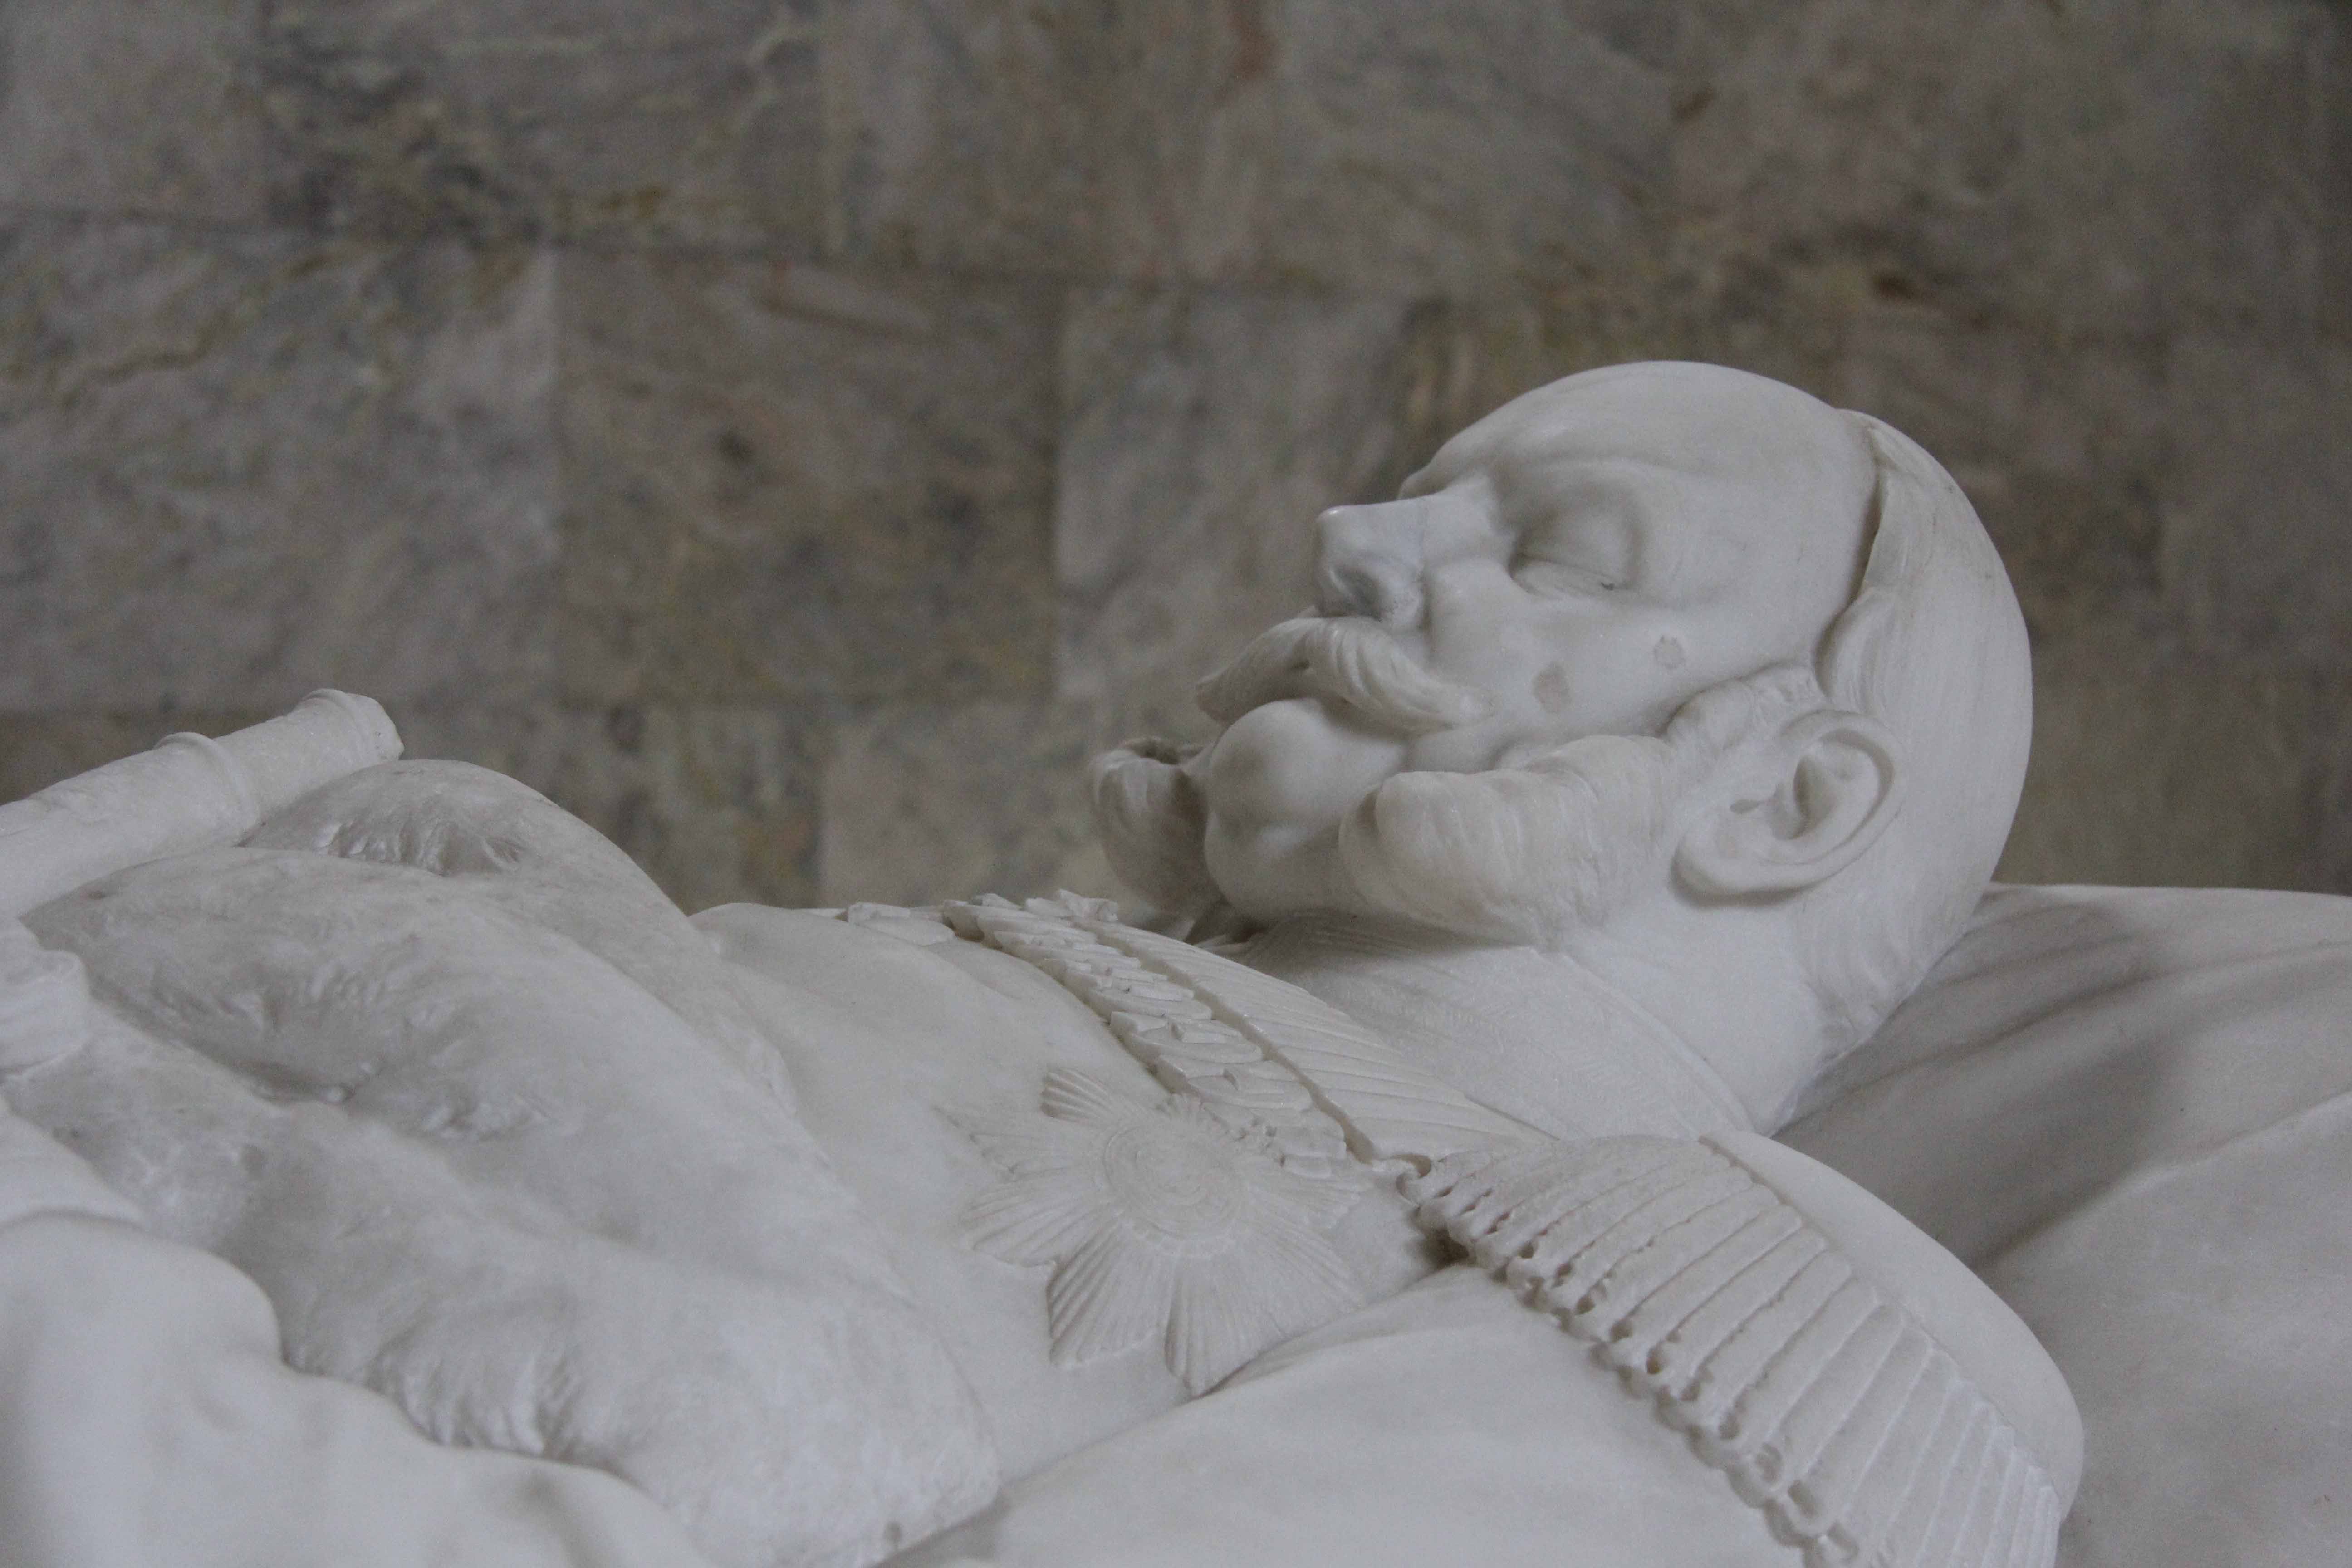 Grave Statue of Kaiser Wilhelm I in The Mausoleum in The Palace Gardens of Schloss Charlottenburg in Berlin